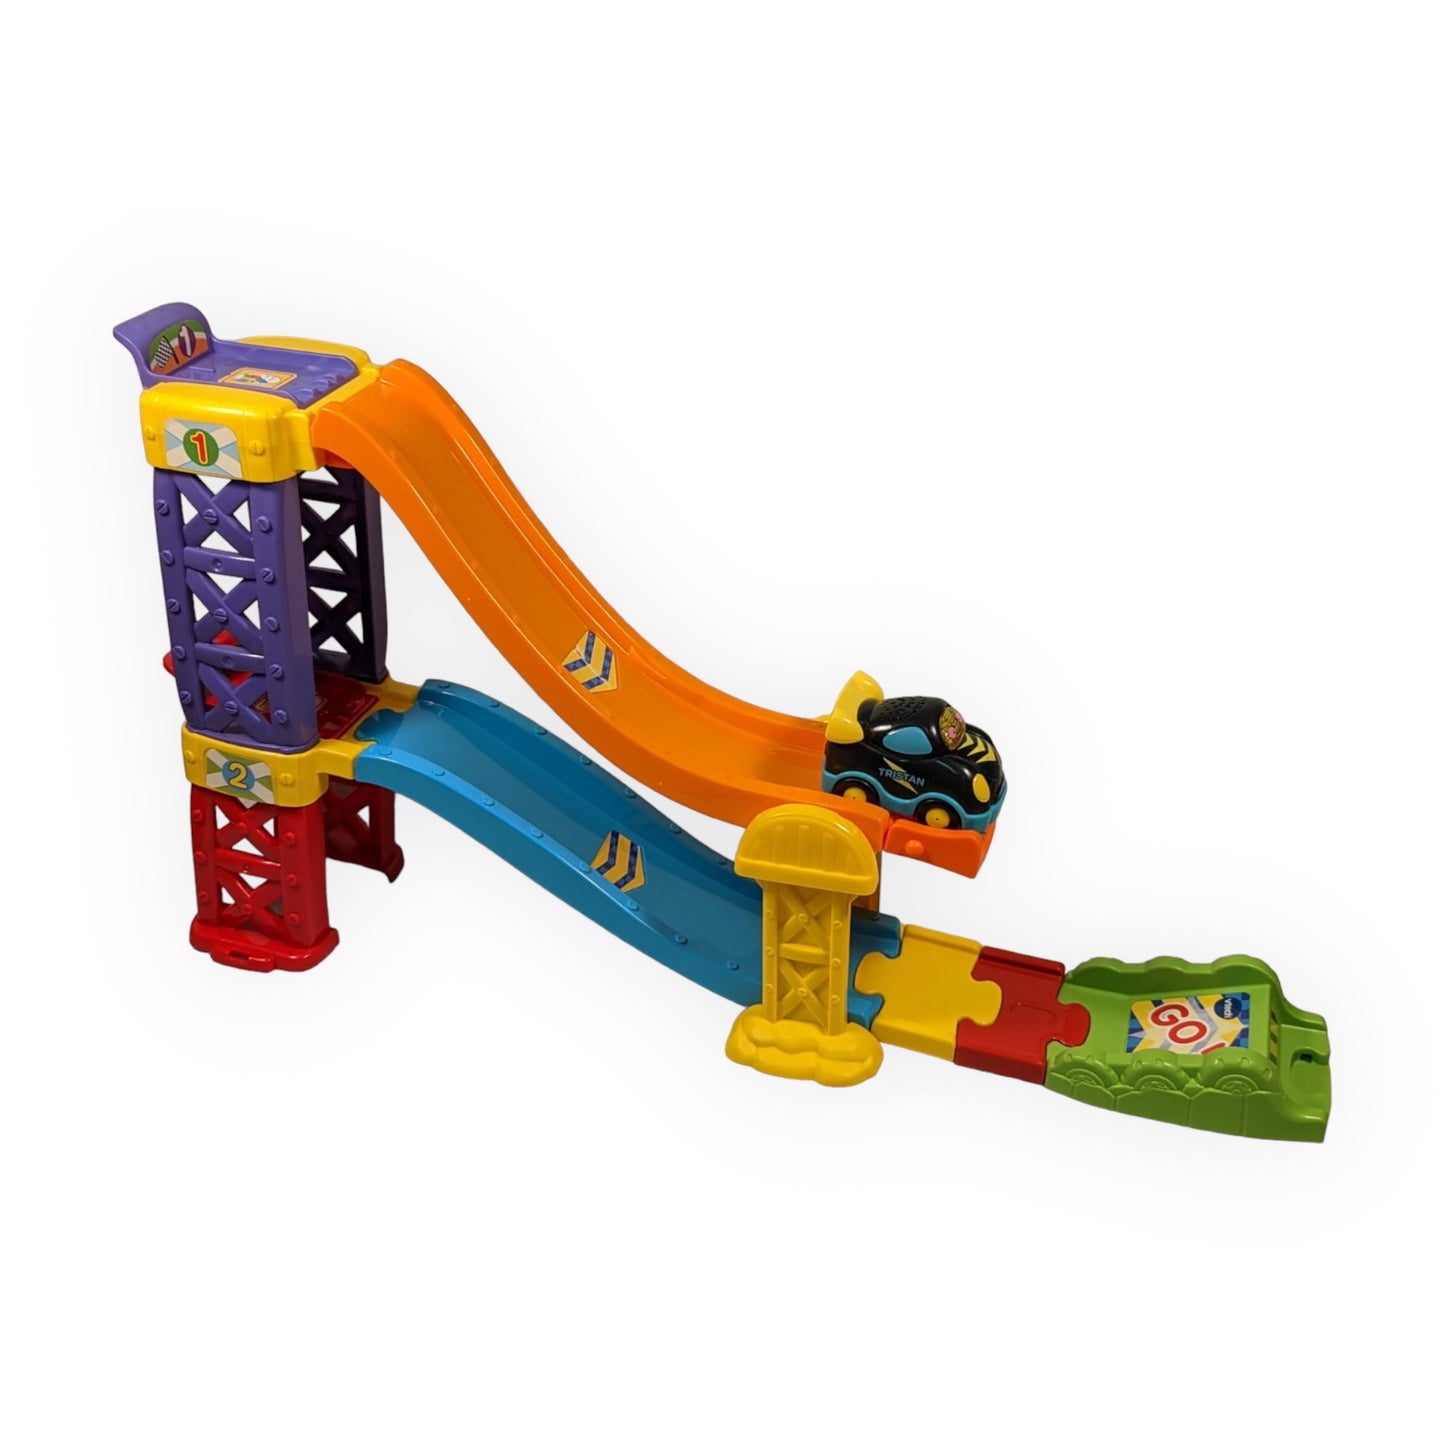 VTech Go! Go! Smart Wheels - 3 in 1 Launch and Play Raceway (French Version)